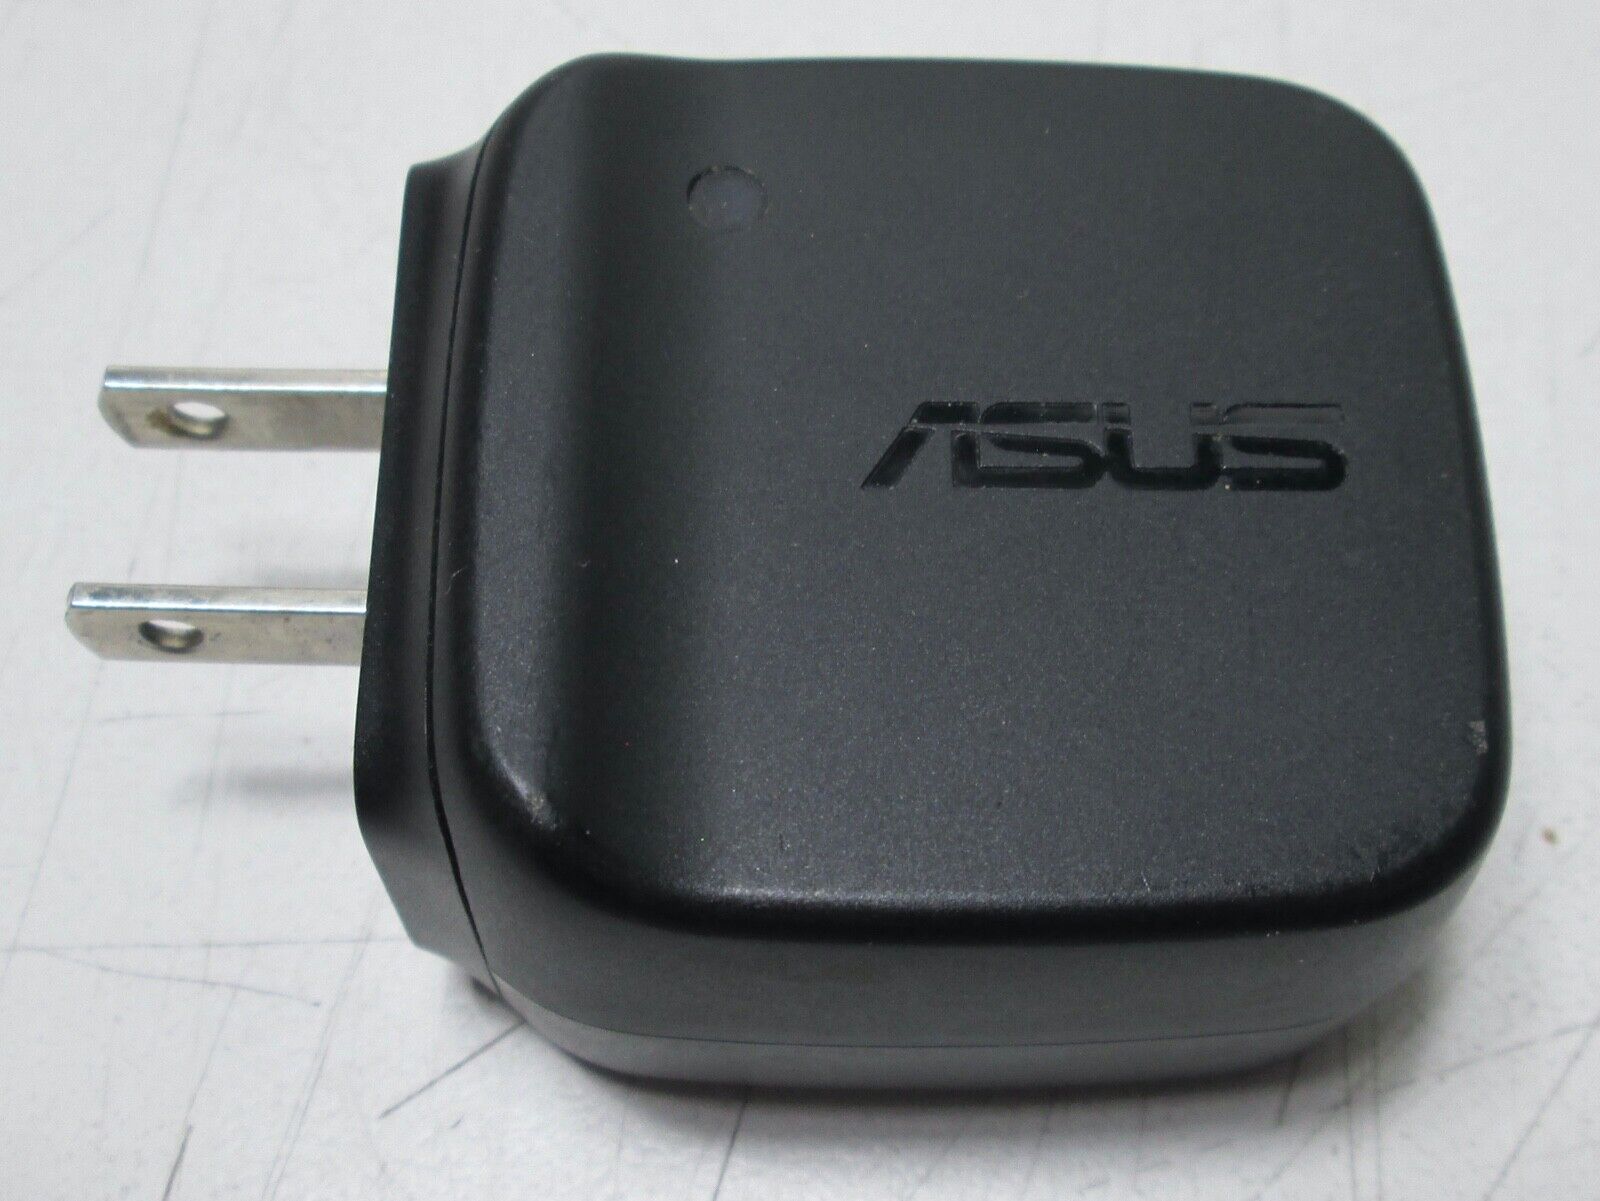 GENUINE ASUS AC ADAPTER AD83531 FOR GOOGLE NEXUS 7 & OTHERS - POWER BRICK ONLY